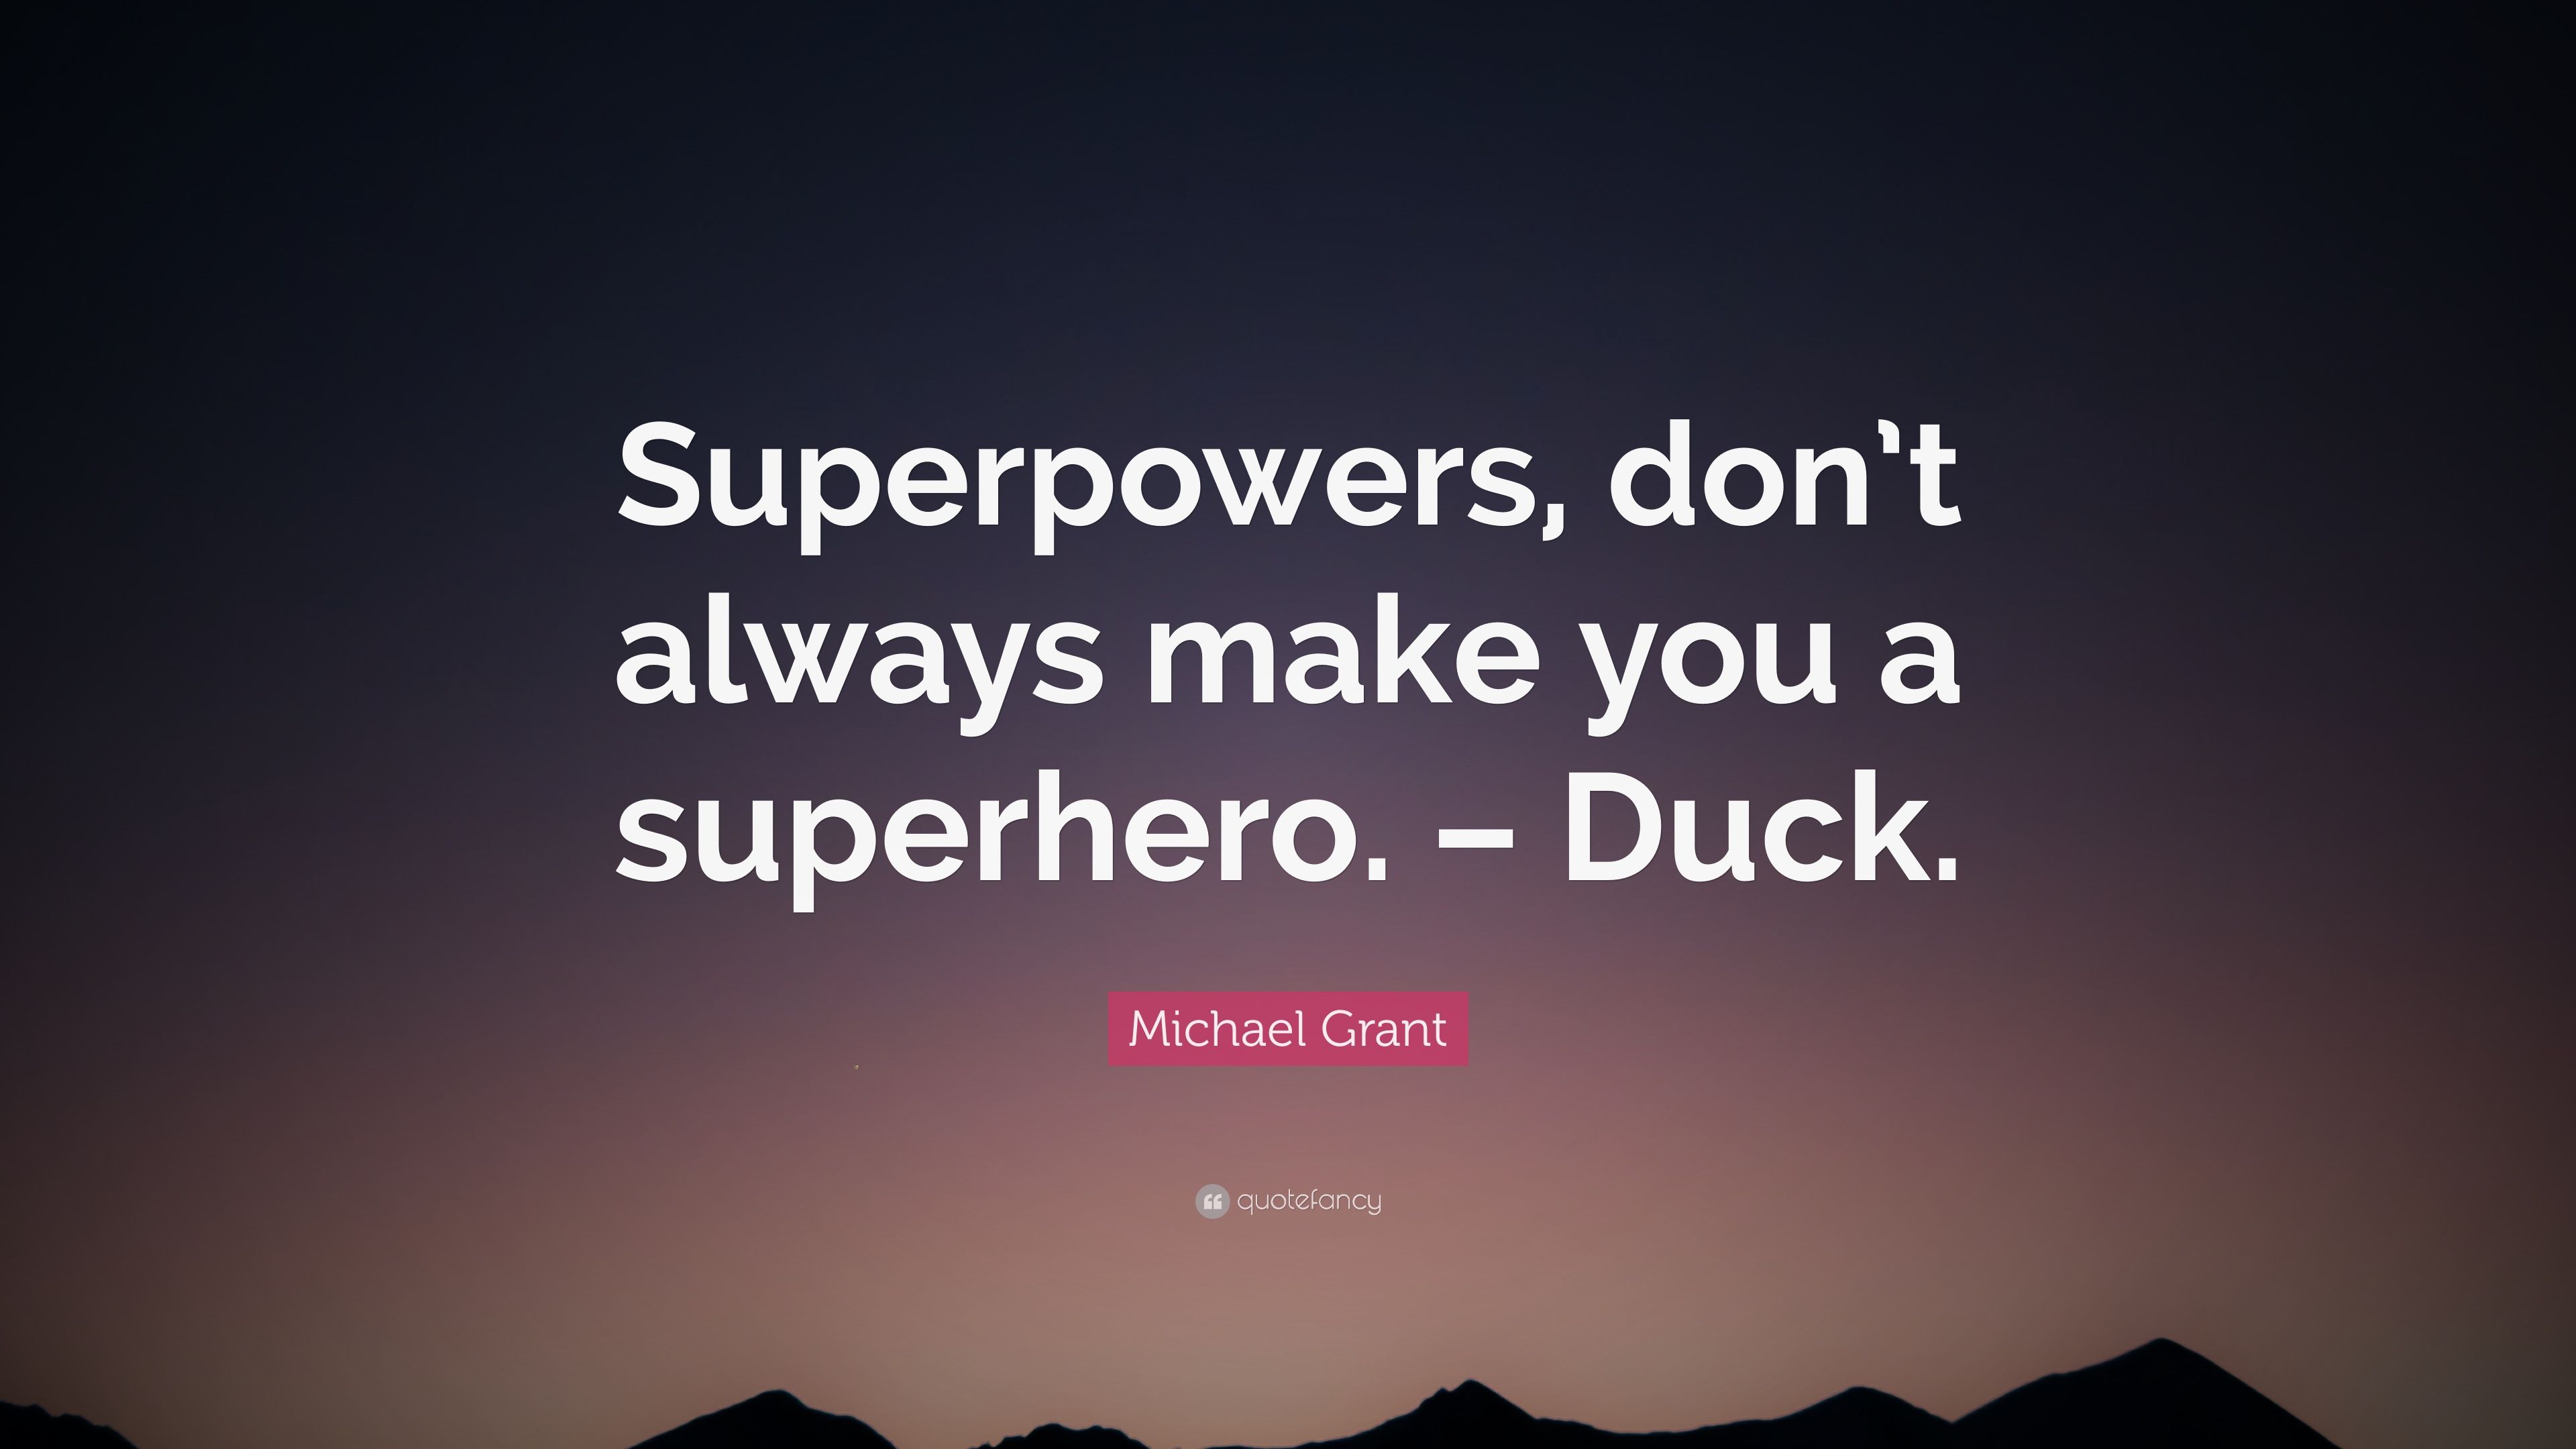 Michael Grant Quote: “Superpowers, don't always make you a